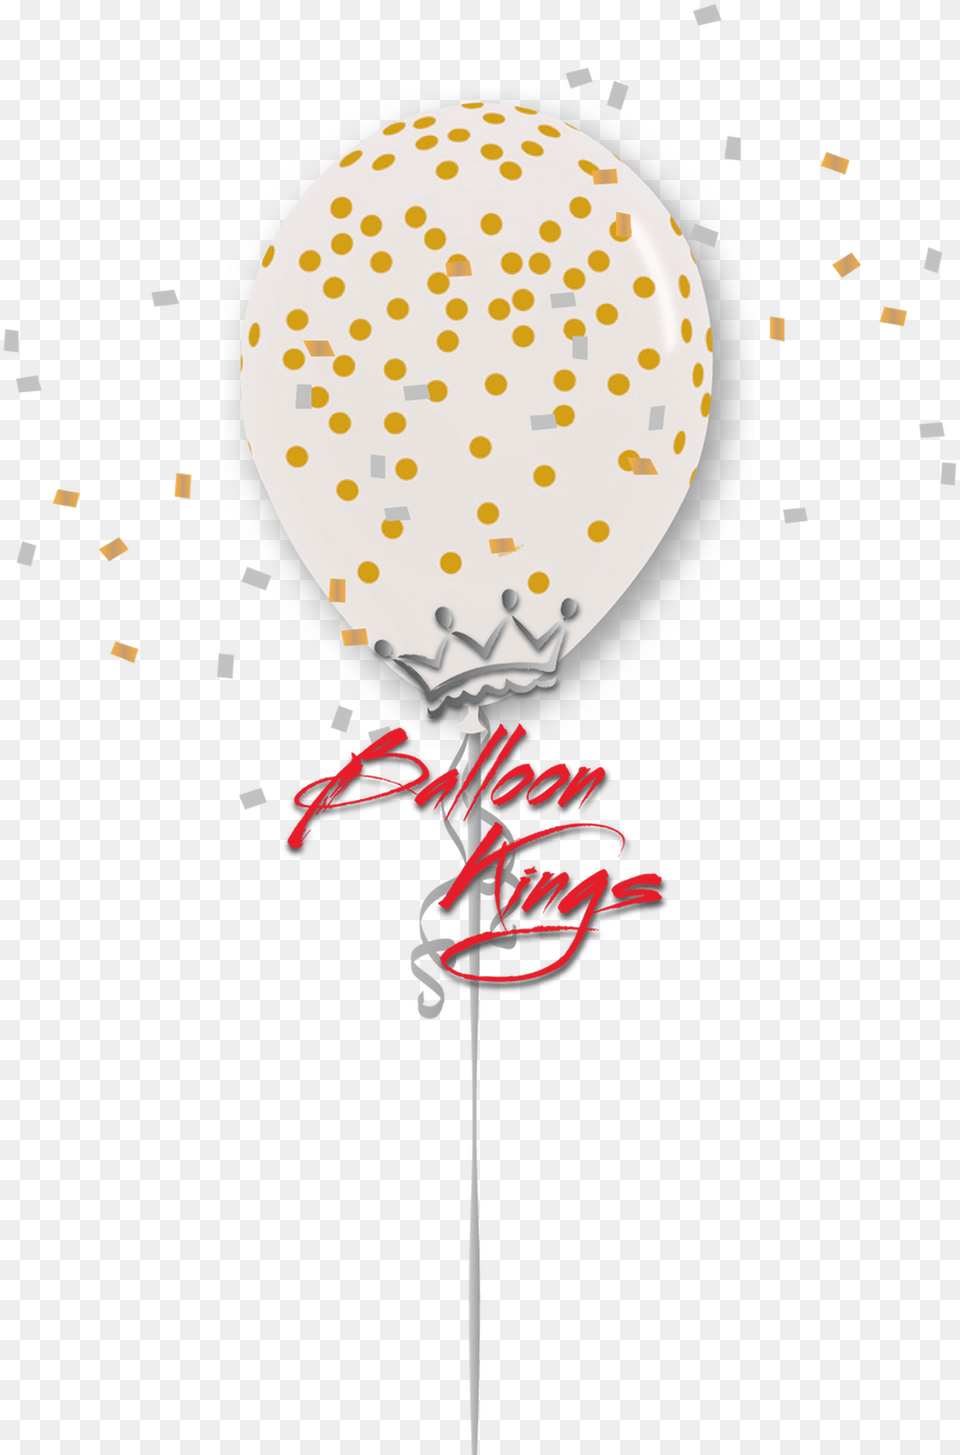 Clear Gold Dots Picsart Editing Background Full Hd, Balloon, Paper, Plate, Confetti Free Png Download